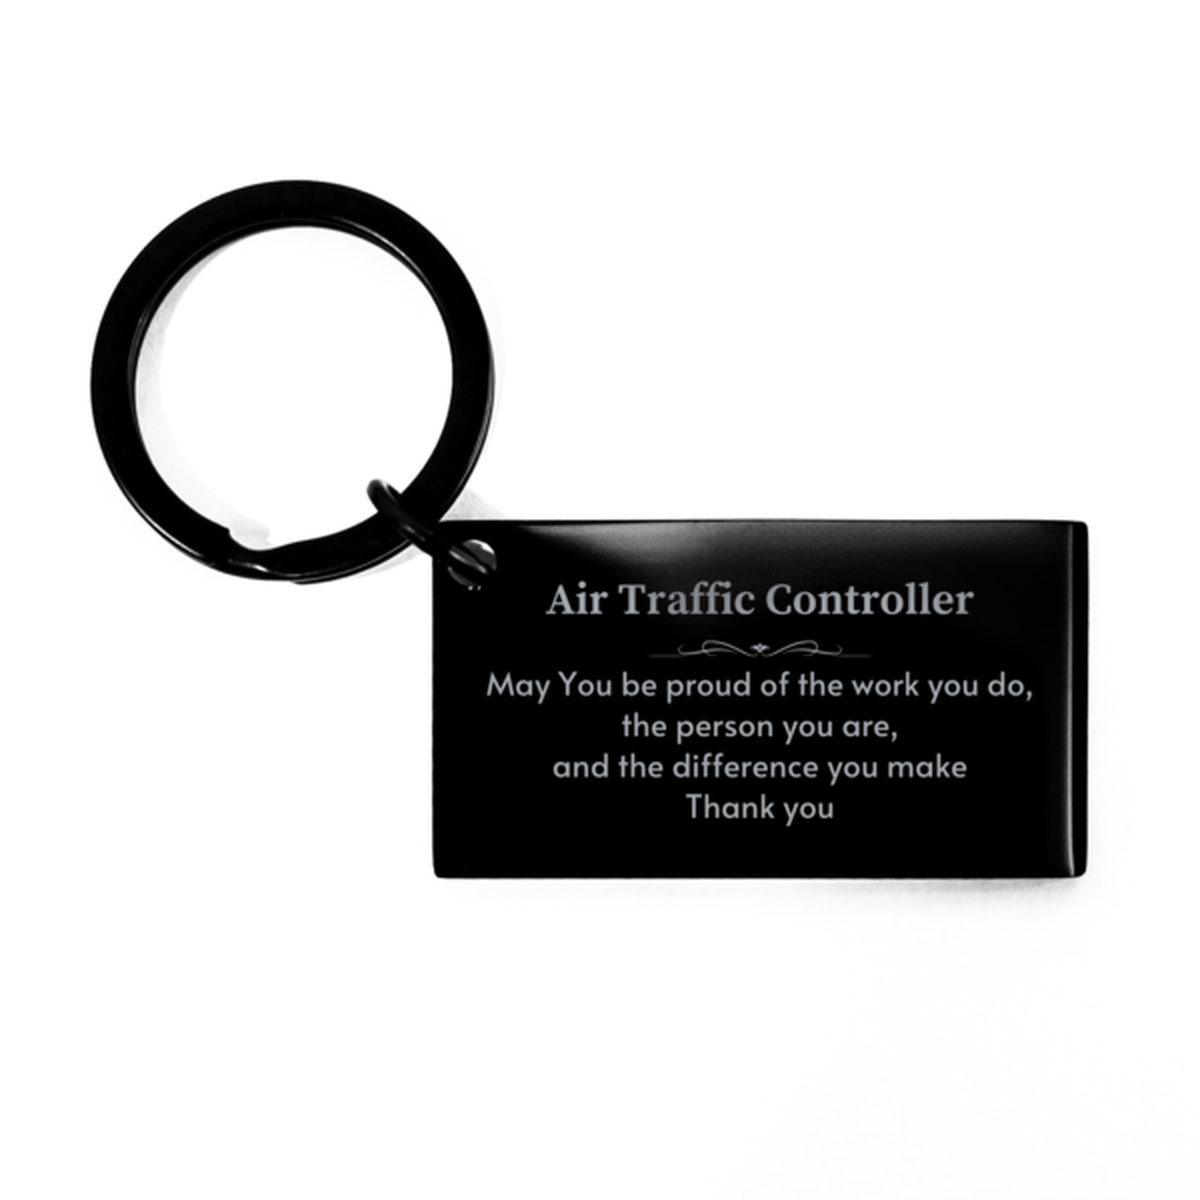 Heartwarming Keychain Retirement Coworkers Gifts for Air Traffic Controller, Chemist May You be proud of the work you do, the person you are Gifts for Boss Men Women Friends